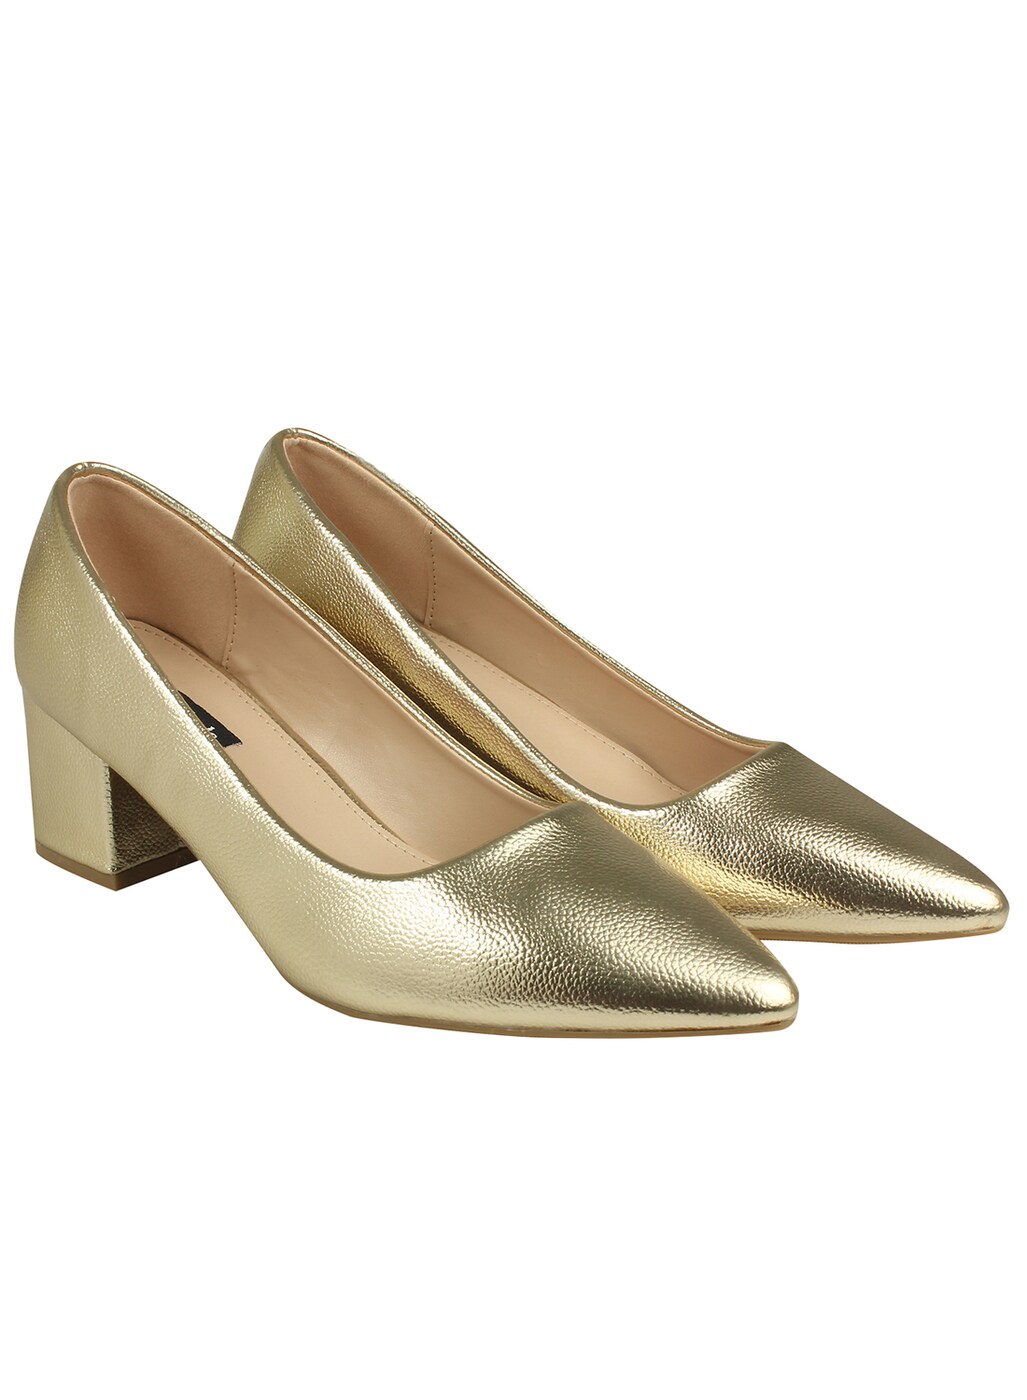 gold shoes small heel